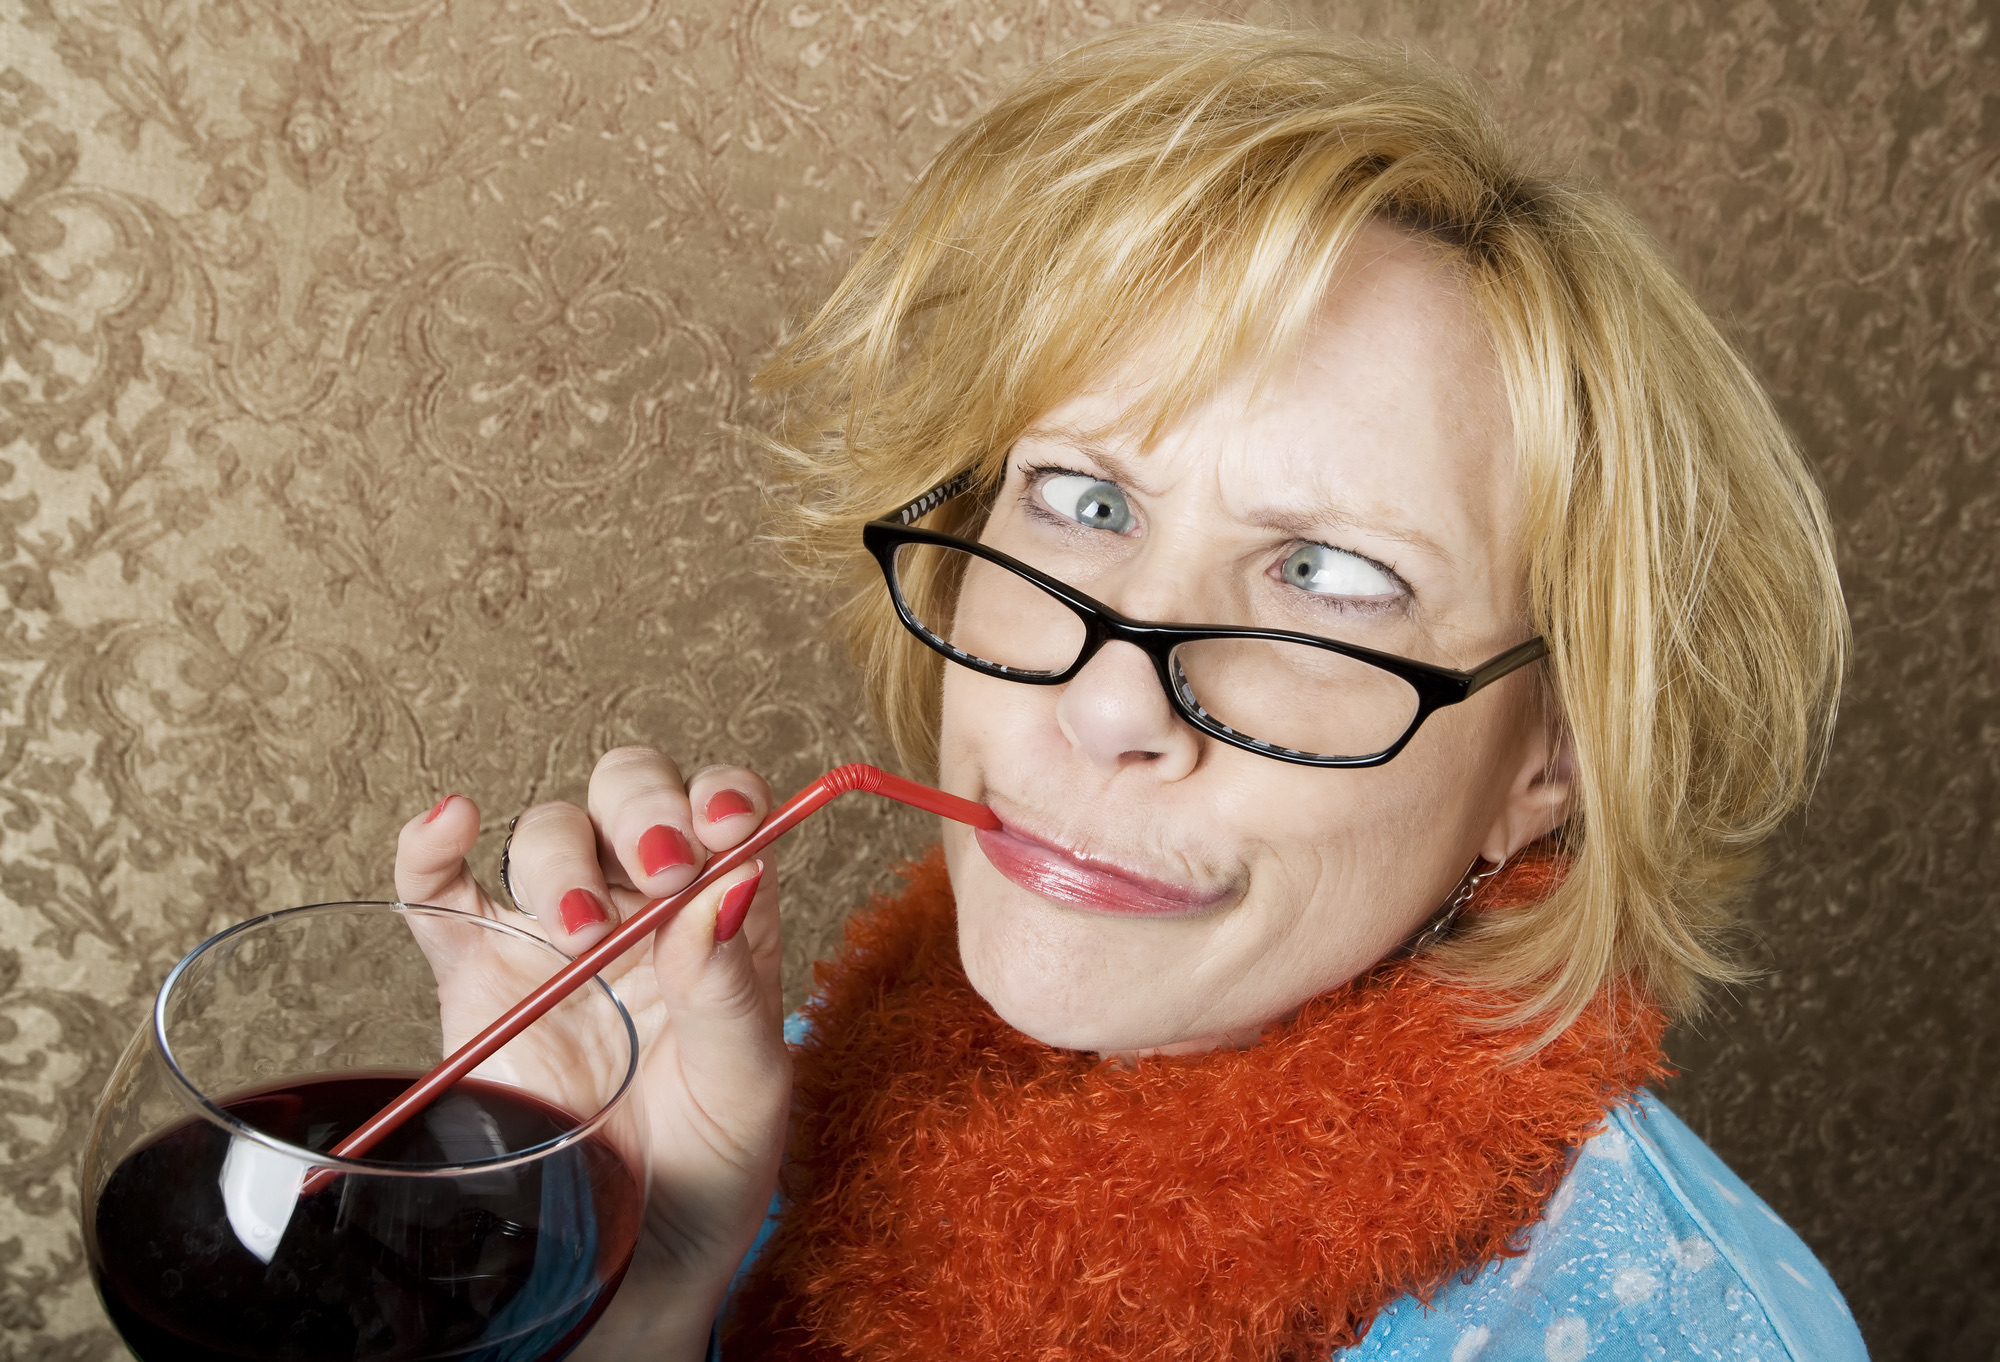 Crazy woman with crossed eyes drinking wine through a straw